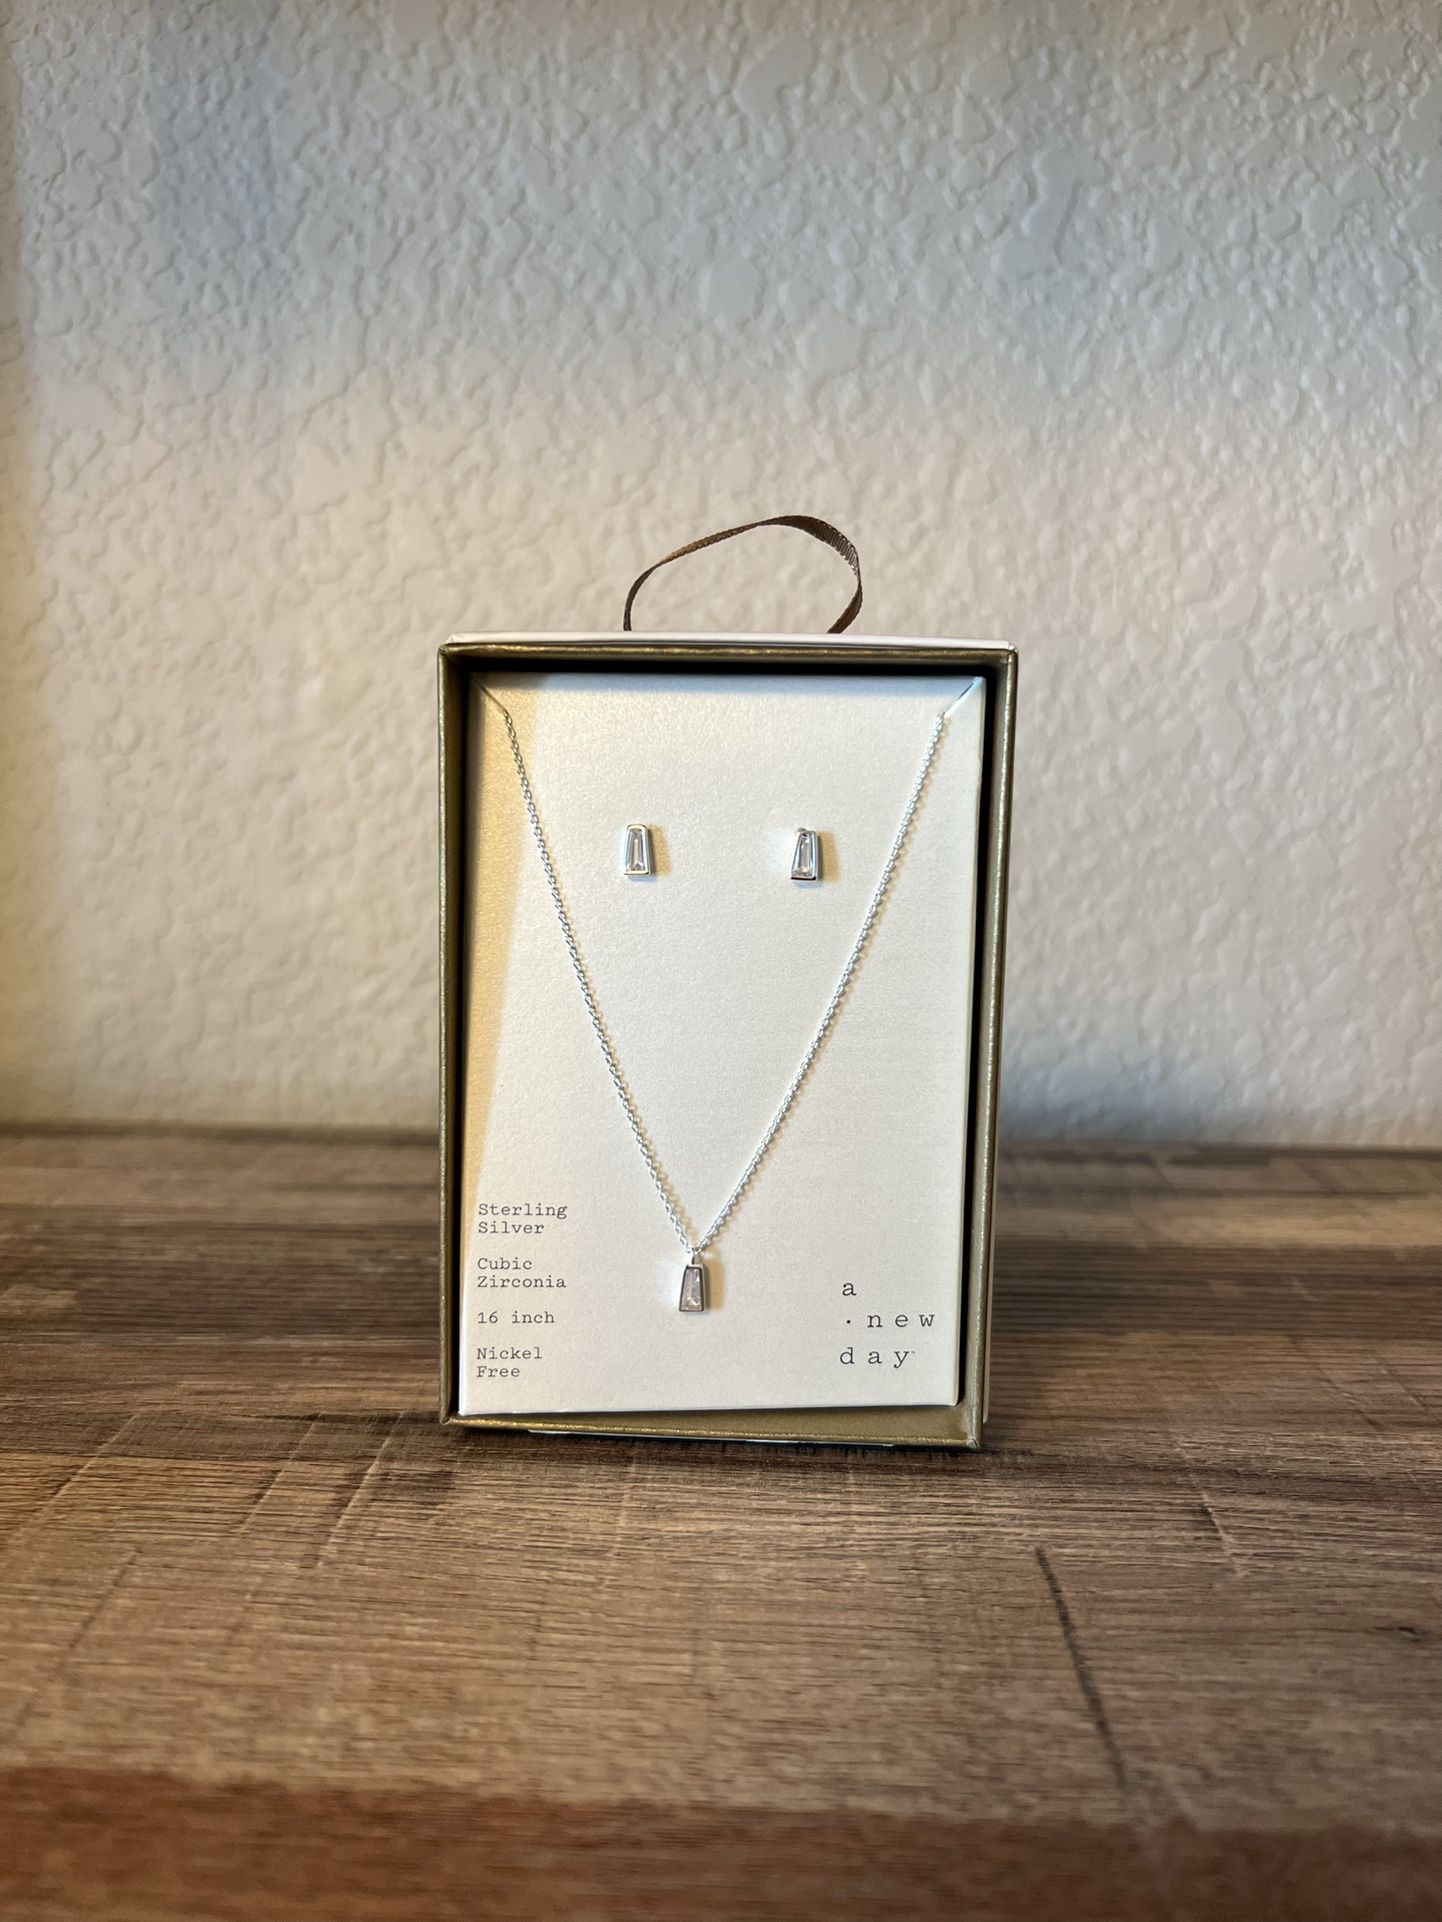 A New Day Necklace Earring Set